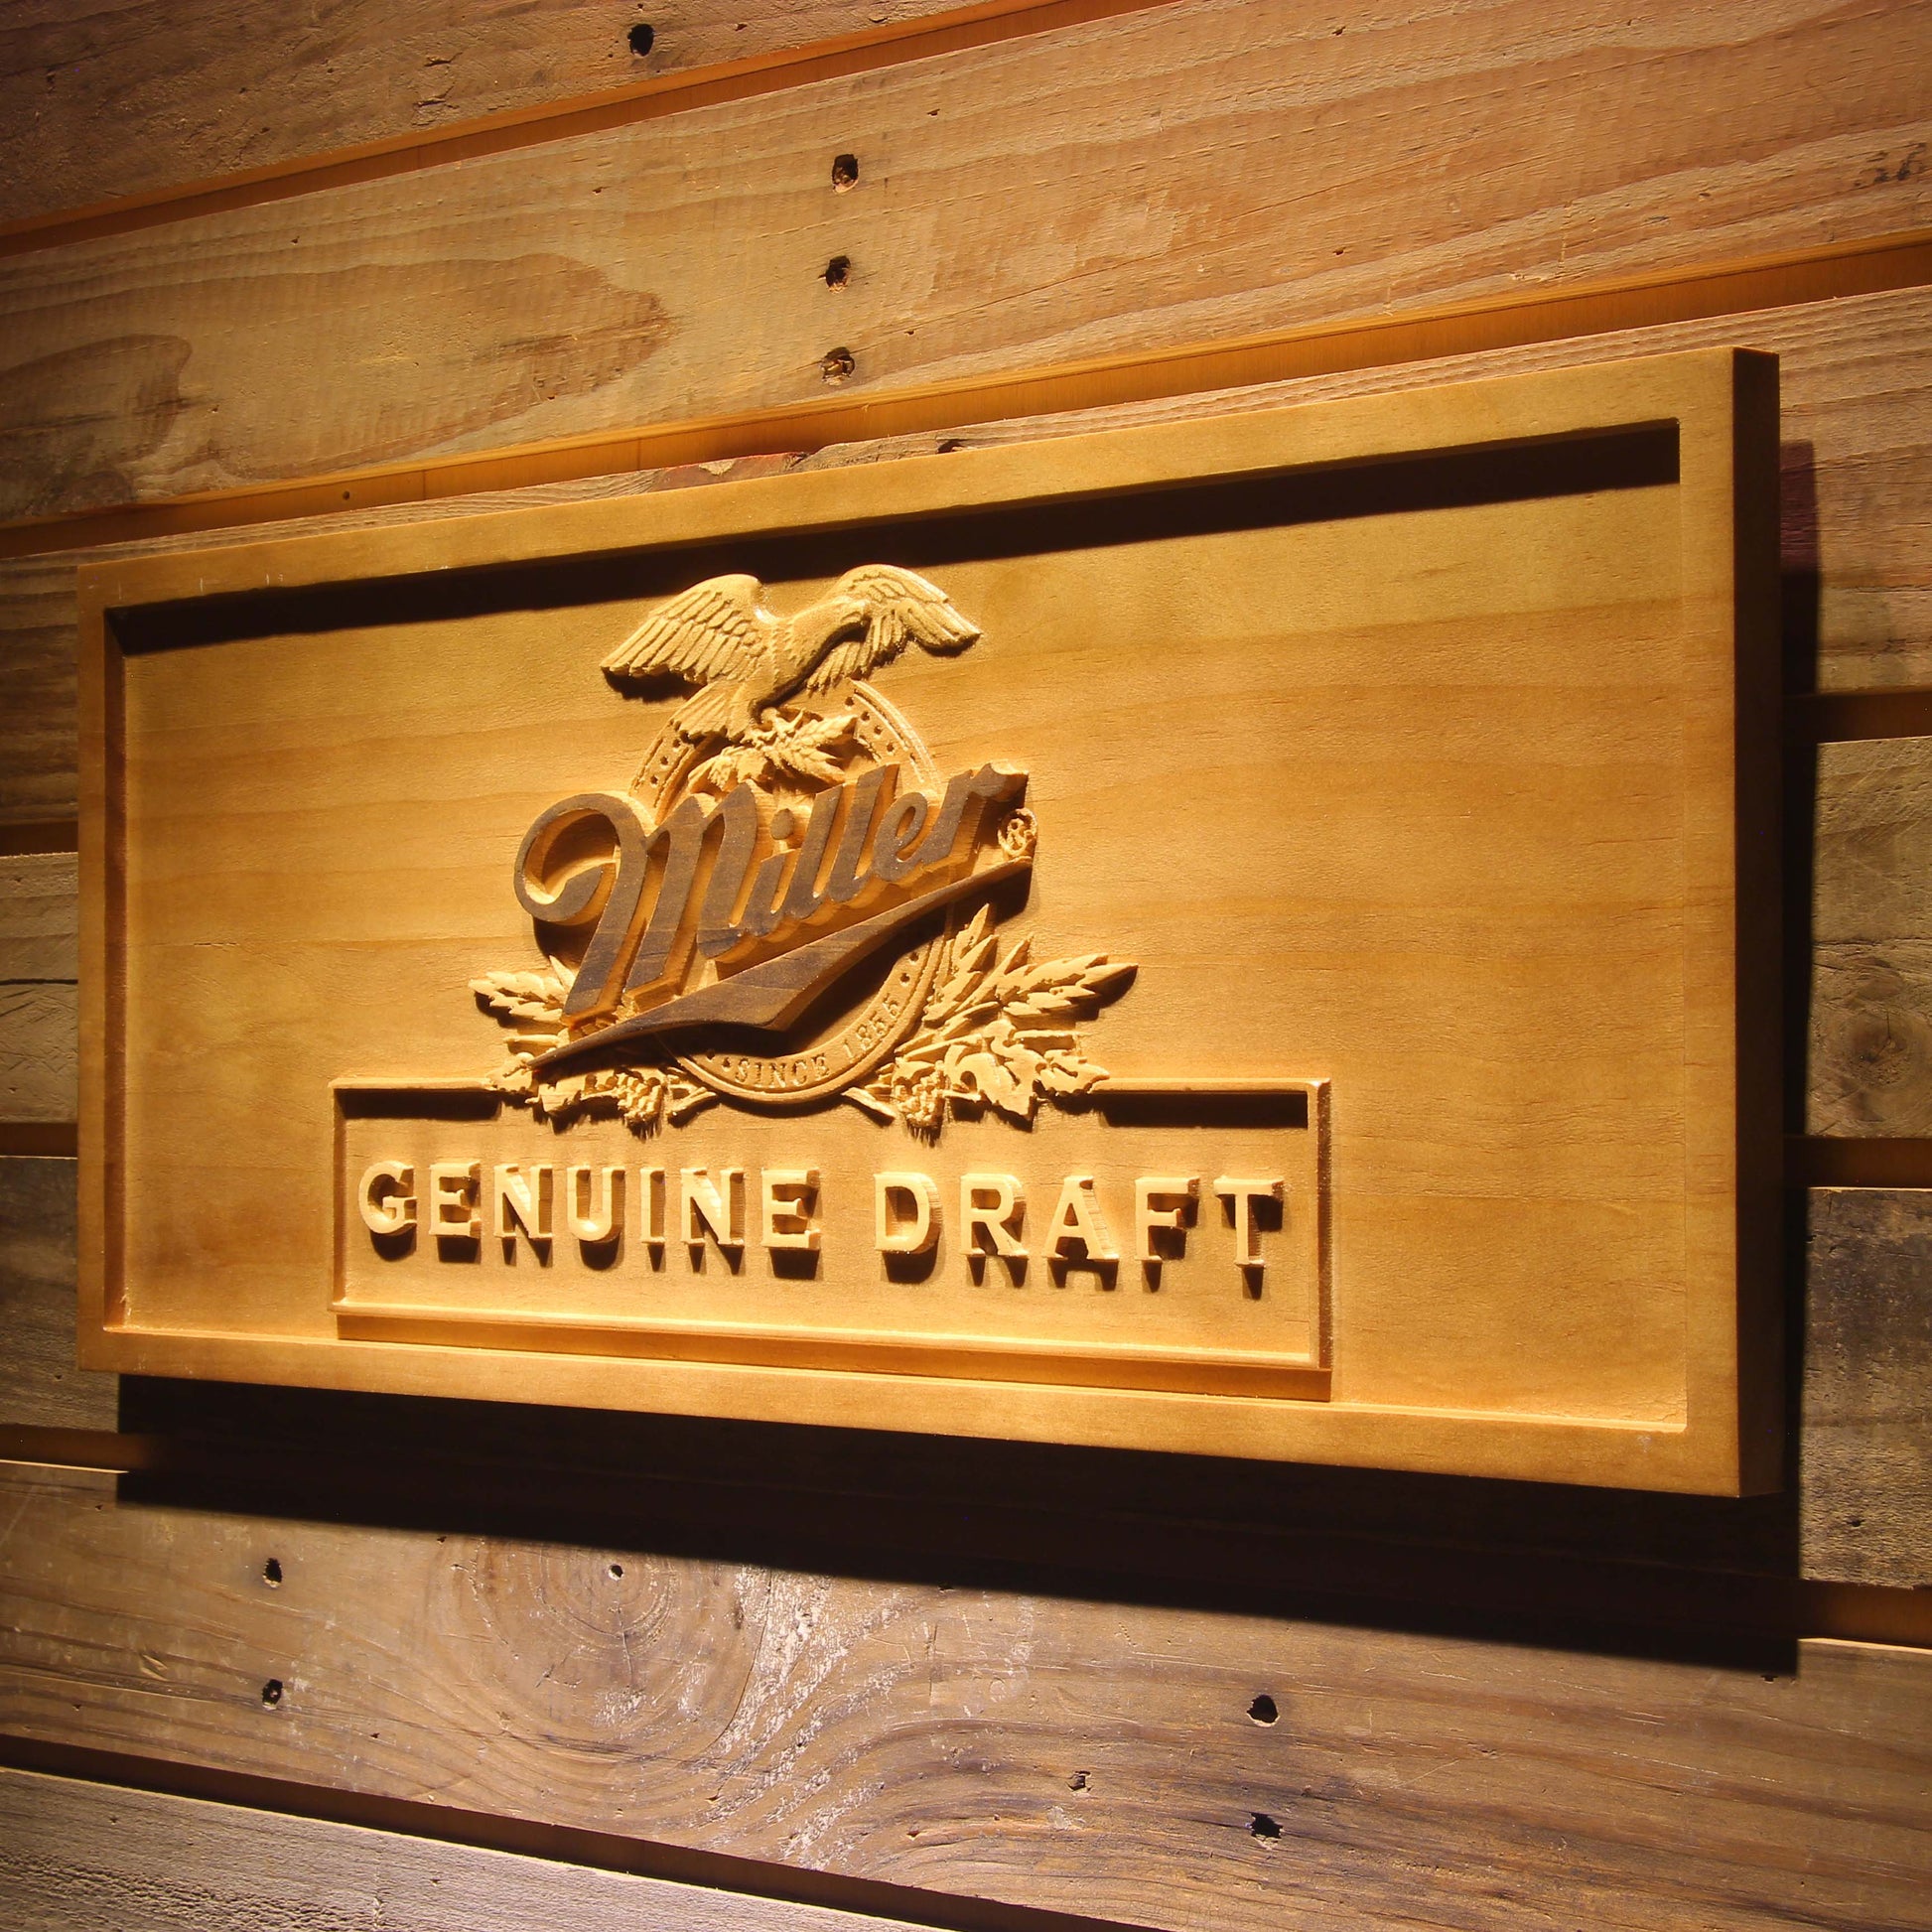 Miller Eagle Genuine Draft  3D Wooden Signs by Woody Signs Co. - Handmade Crafted Unique Wooden Creative